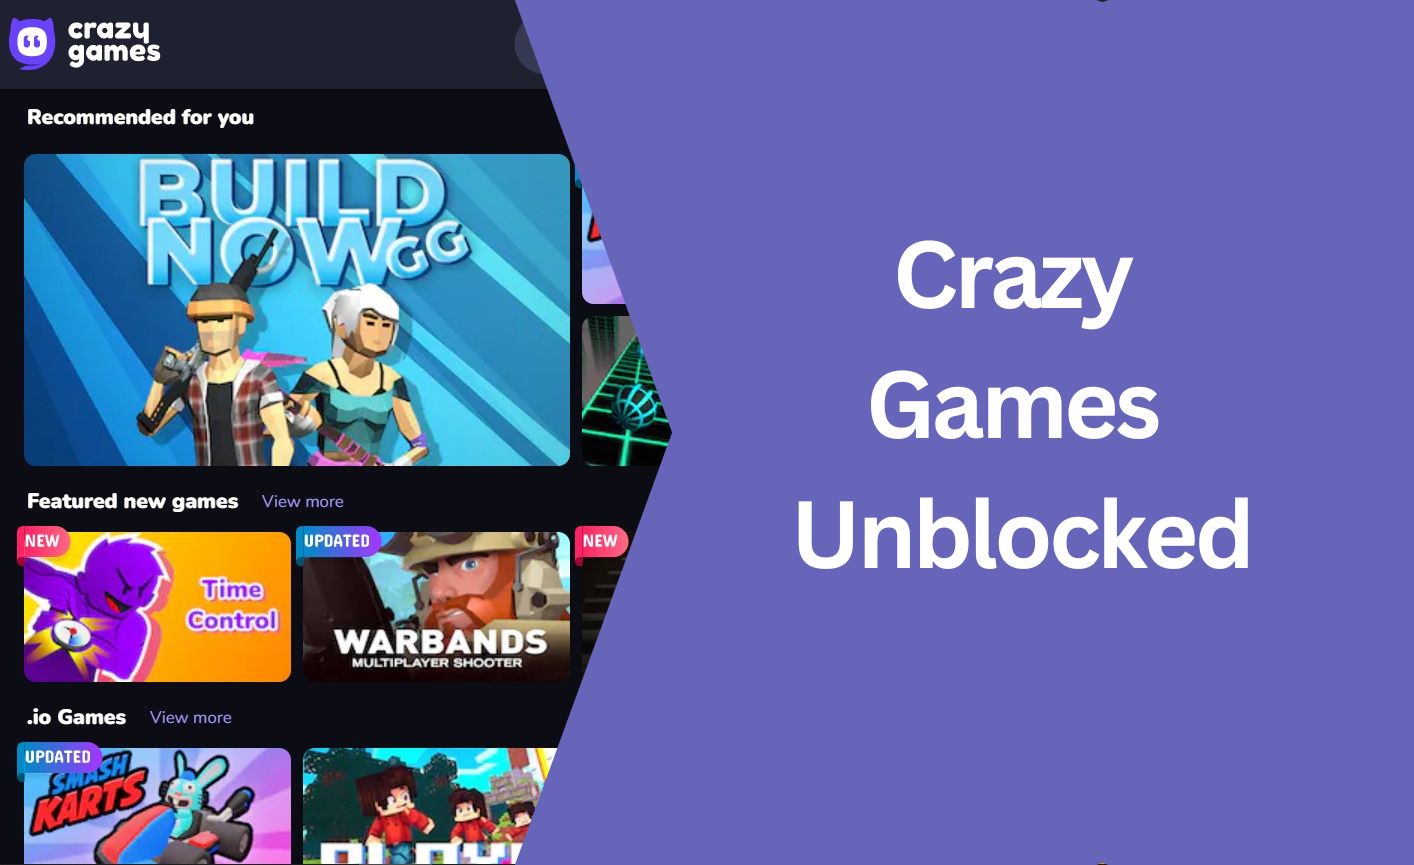 Top 11 Best Crazy Games Unblocked Play Online for Free - Mobilestown -  Medium